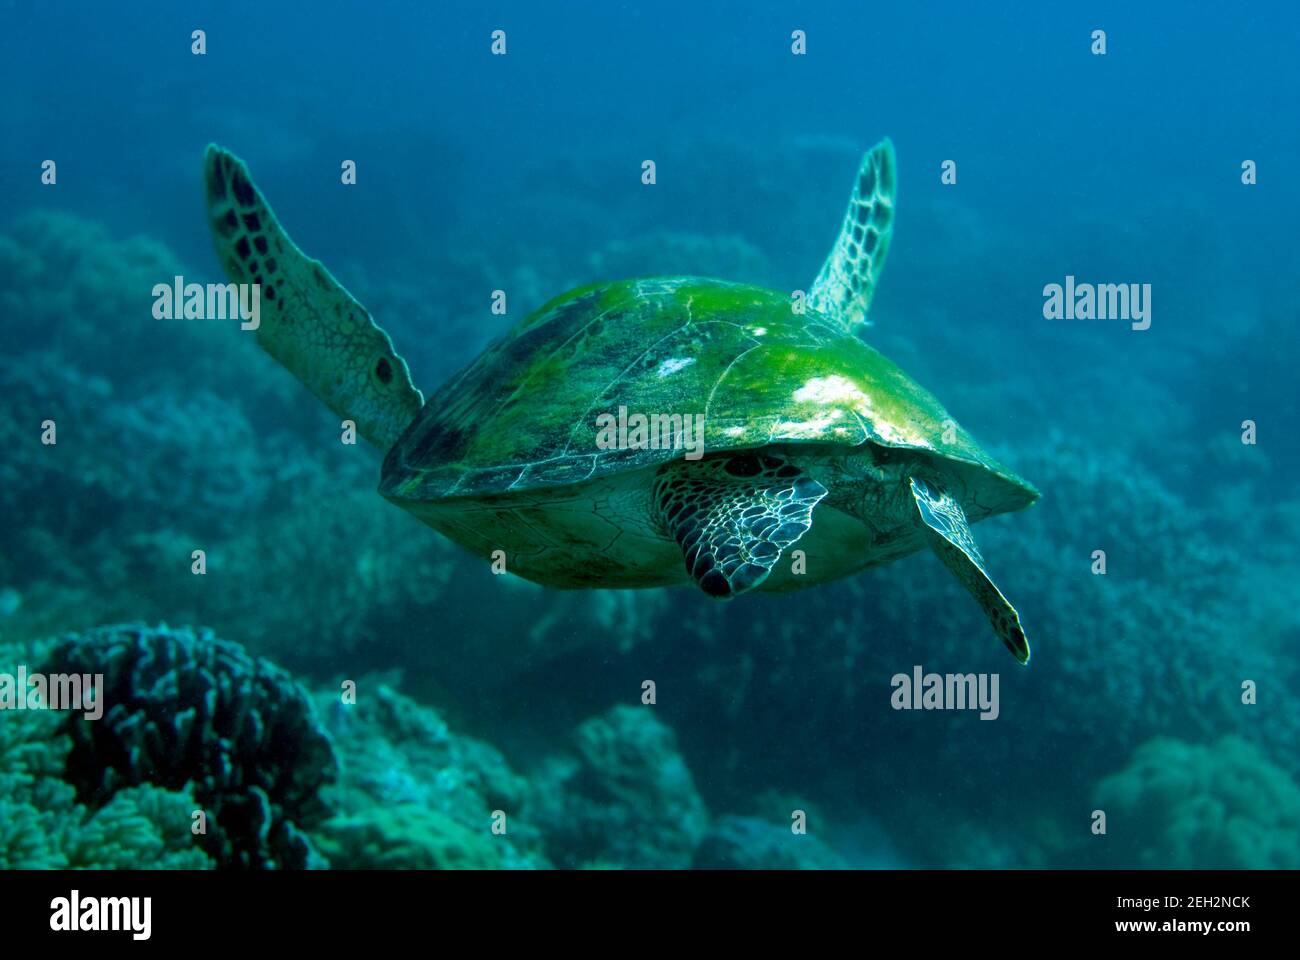 Green Sea Turtle resting on a coral. Underwater image taken scuba diving in Philippines. Stock Photo